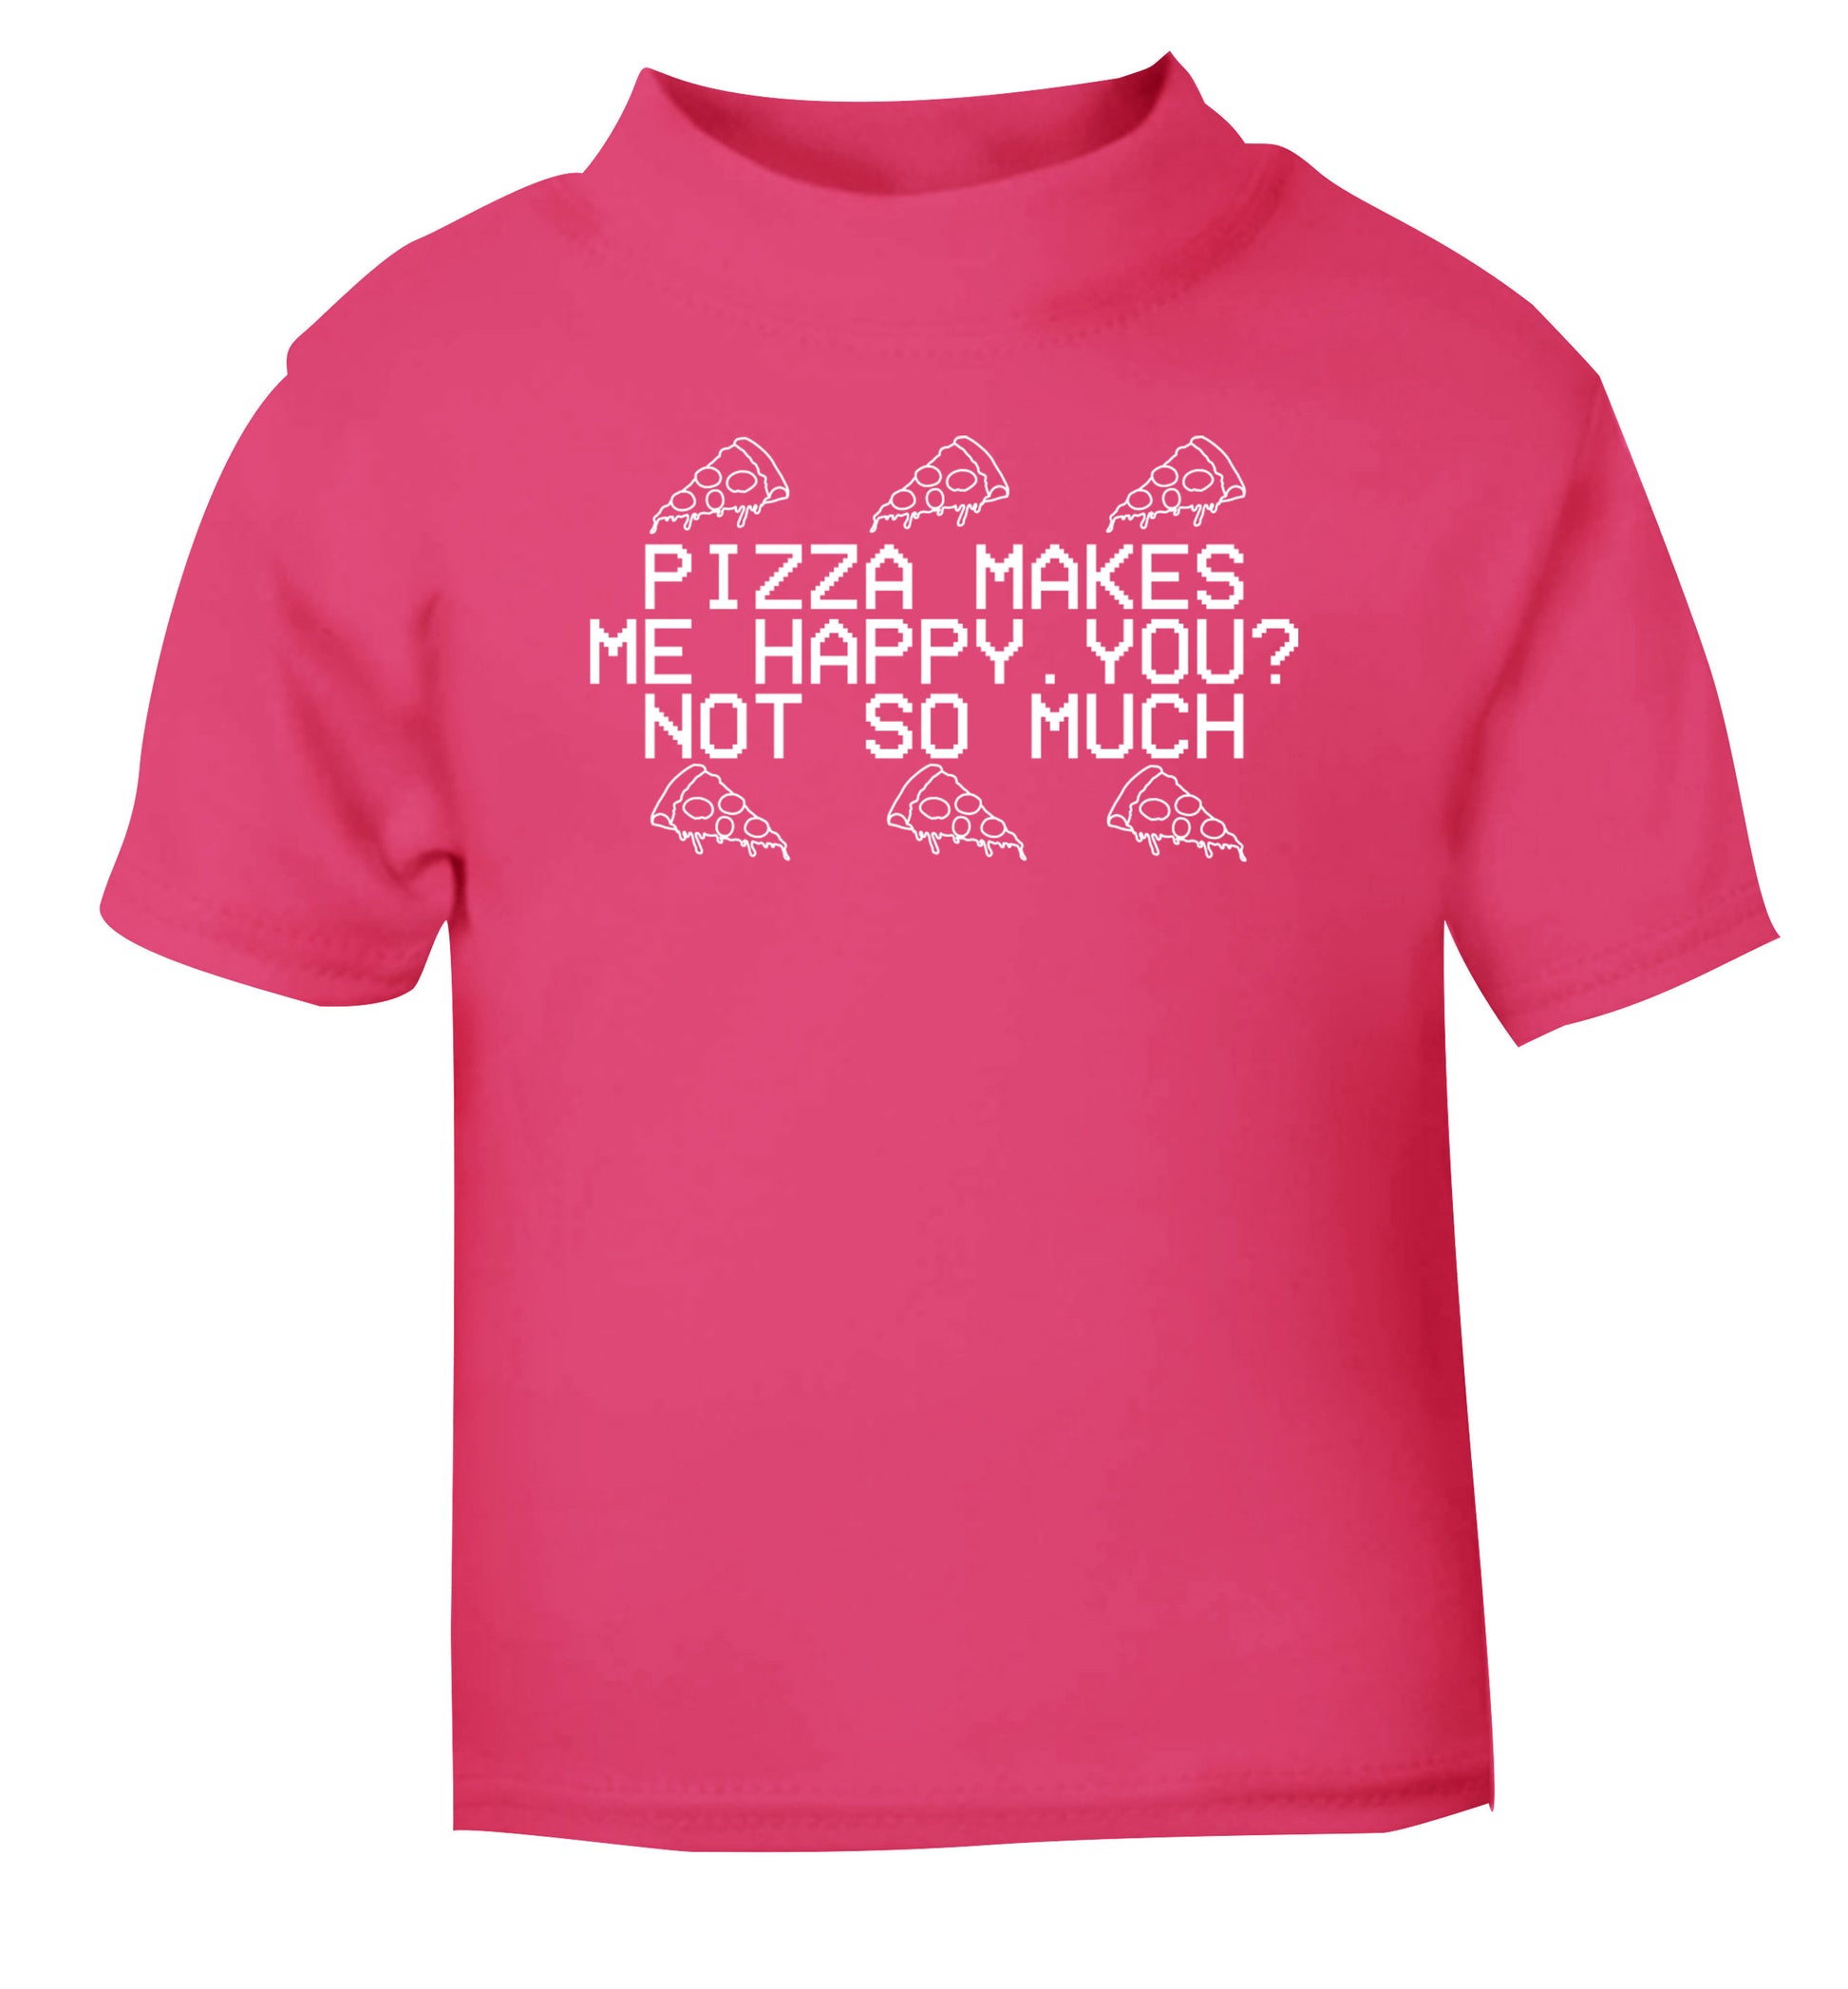 Pizza makes me happy, You? Not so much pink Baby Toddler Tshirt 2 Years